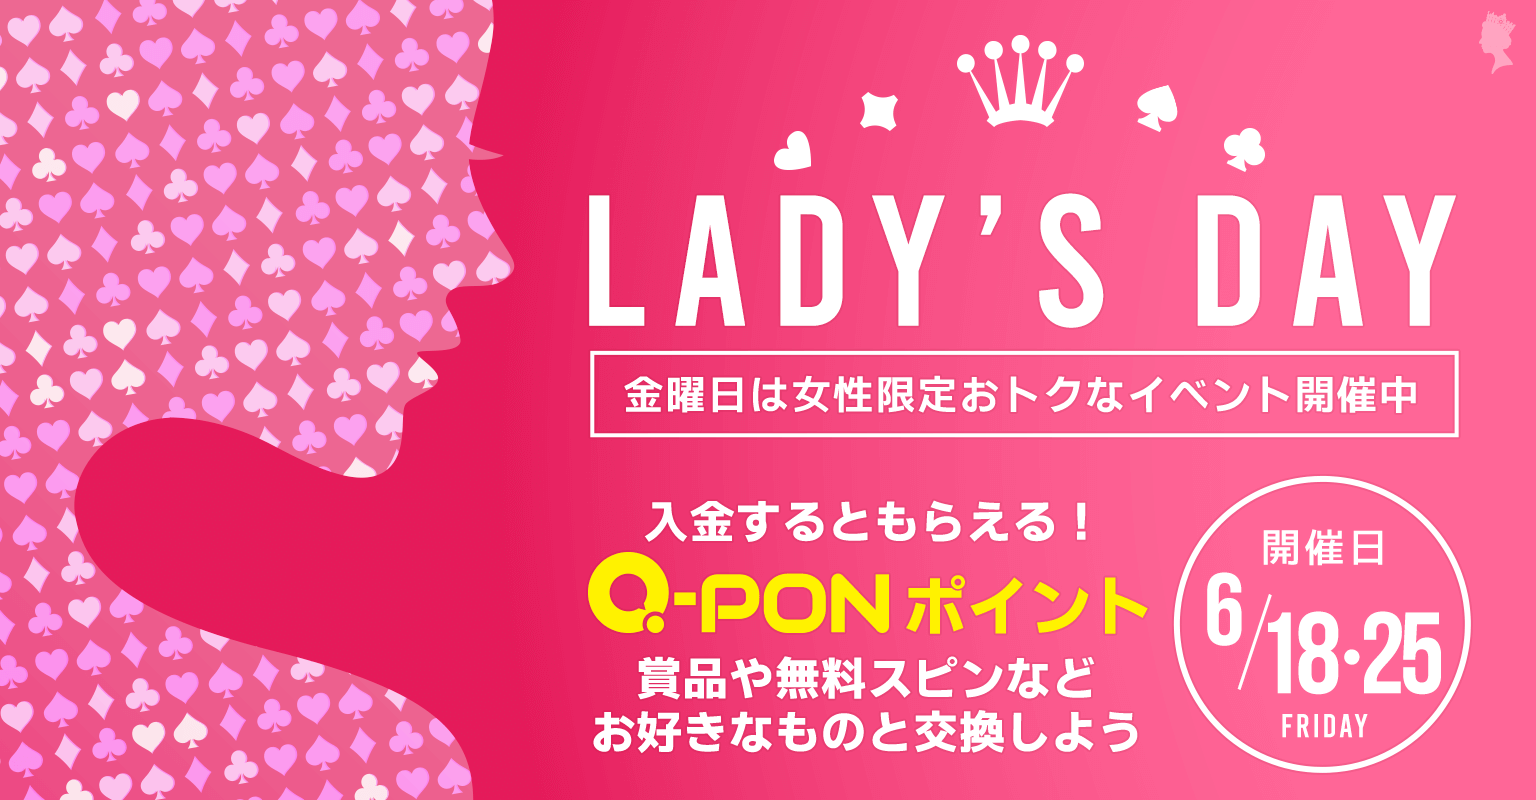 Women out there, enjoy this event! Get a large amount of Q-PON points when you make a deposit. The points can be redeemed for cash, spins, and other bonus.